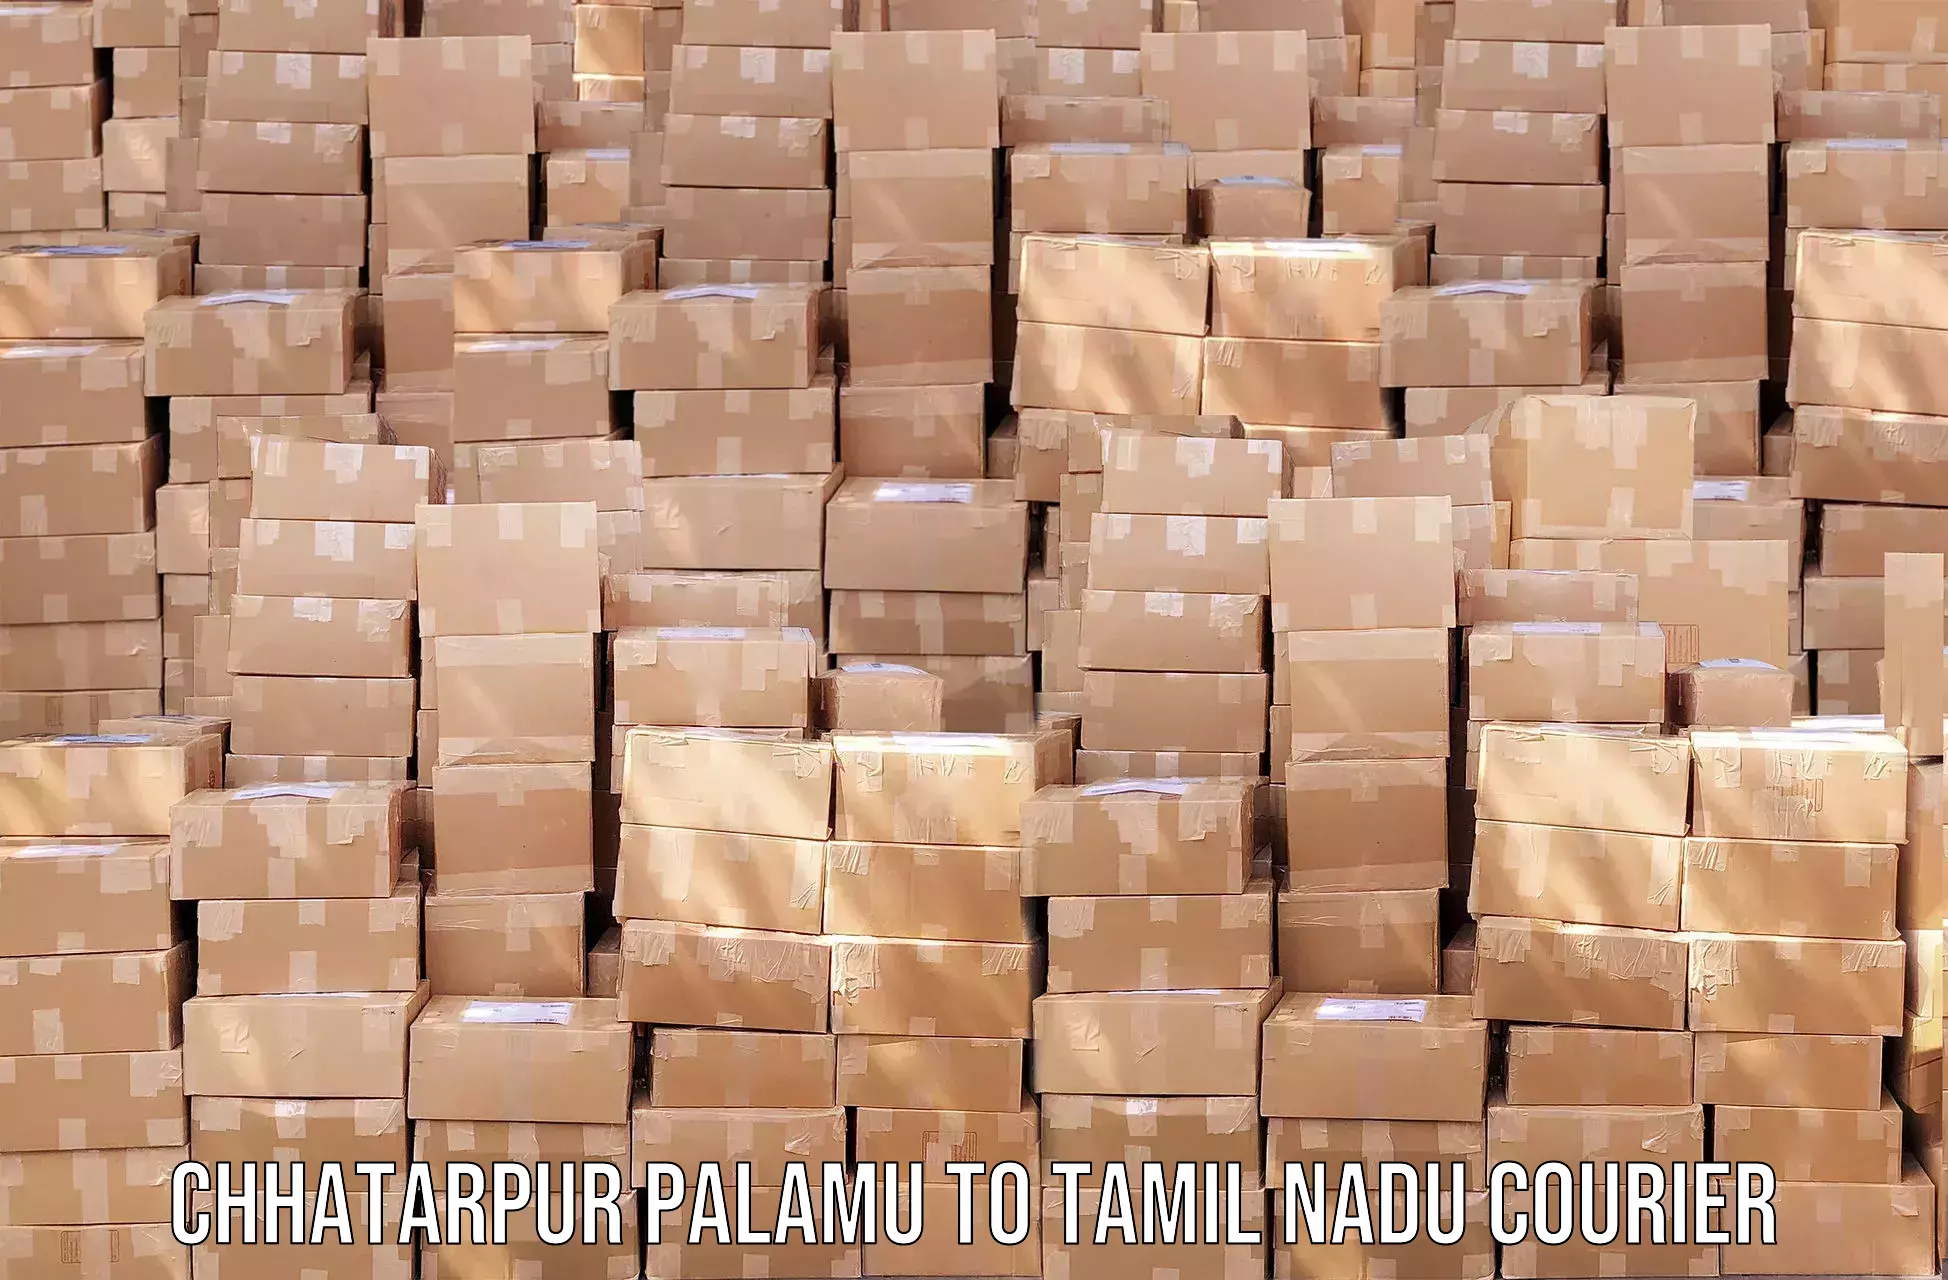 Easy access courier services Chhatarpur Palamu to Sathyamangalam